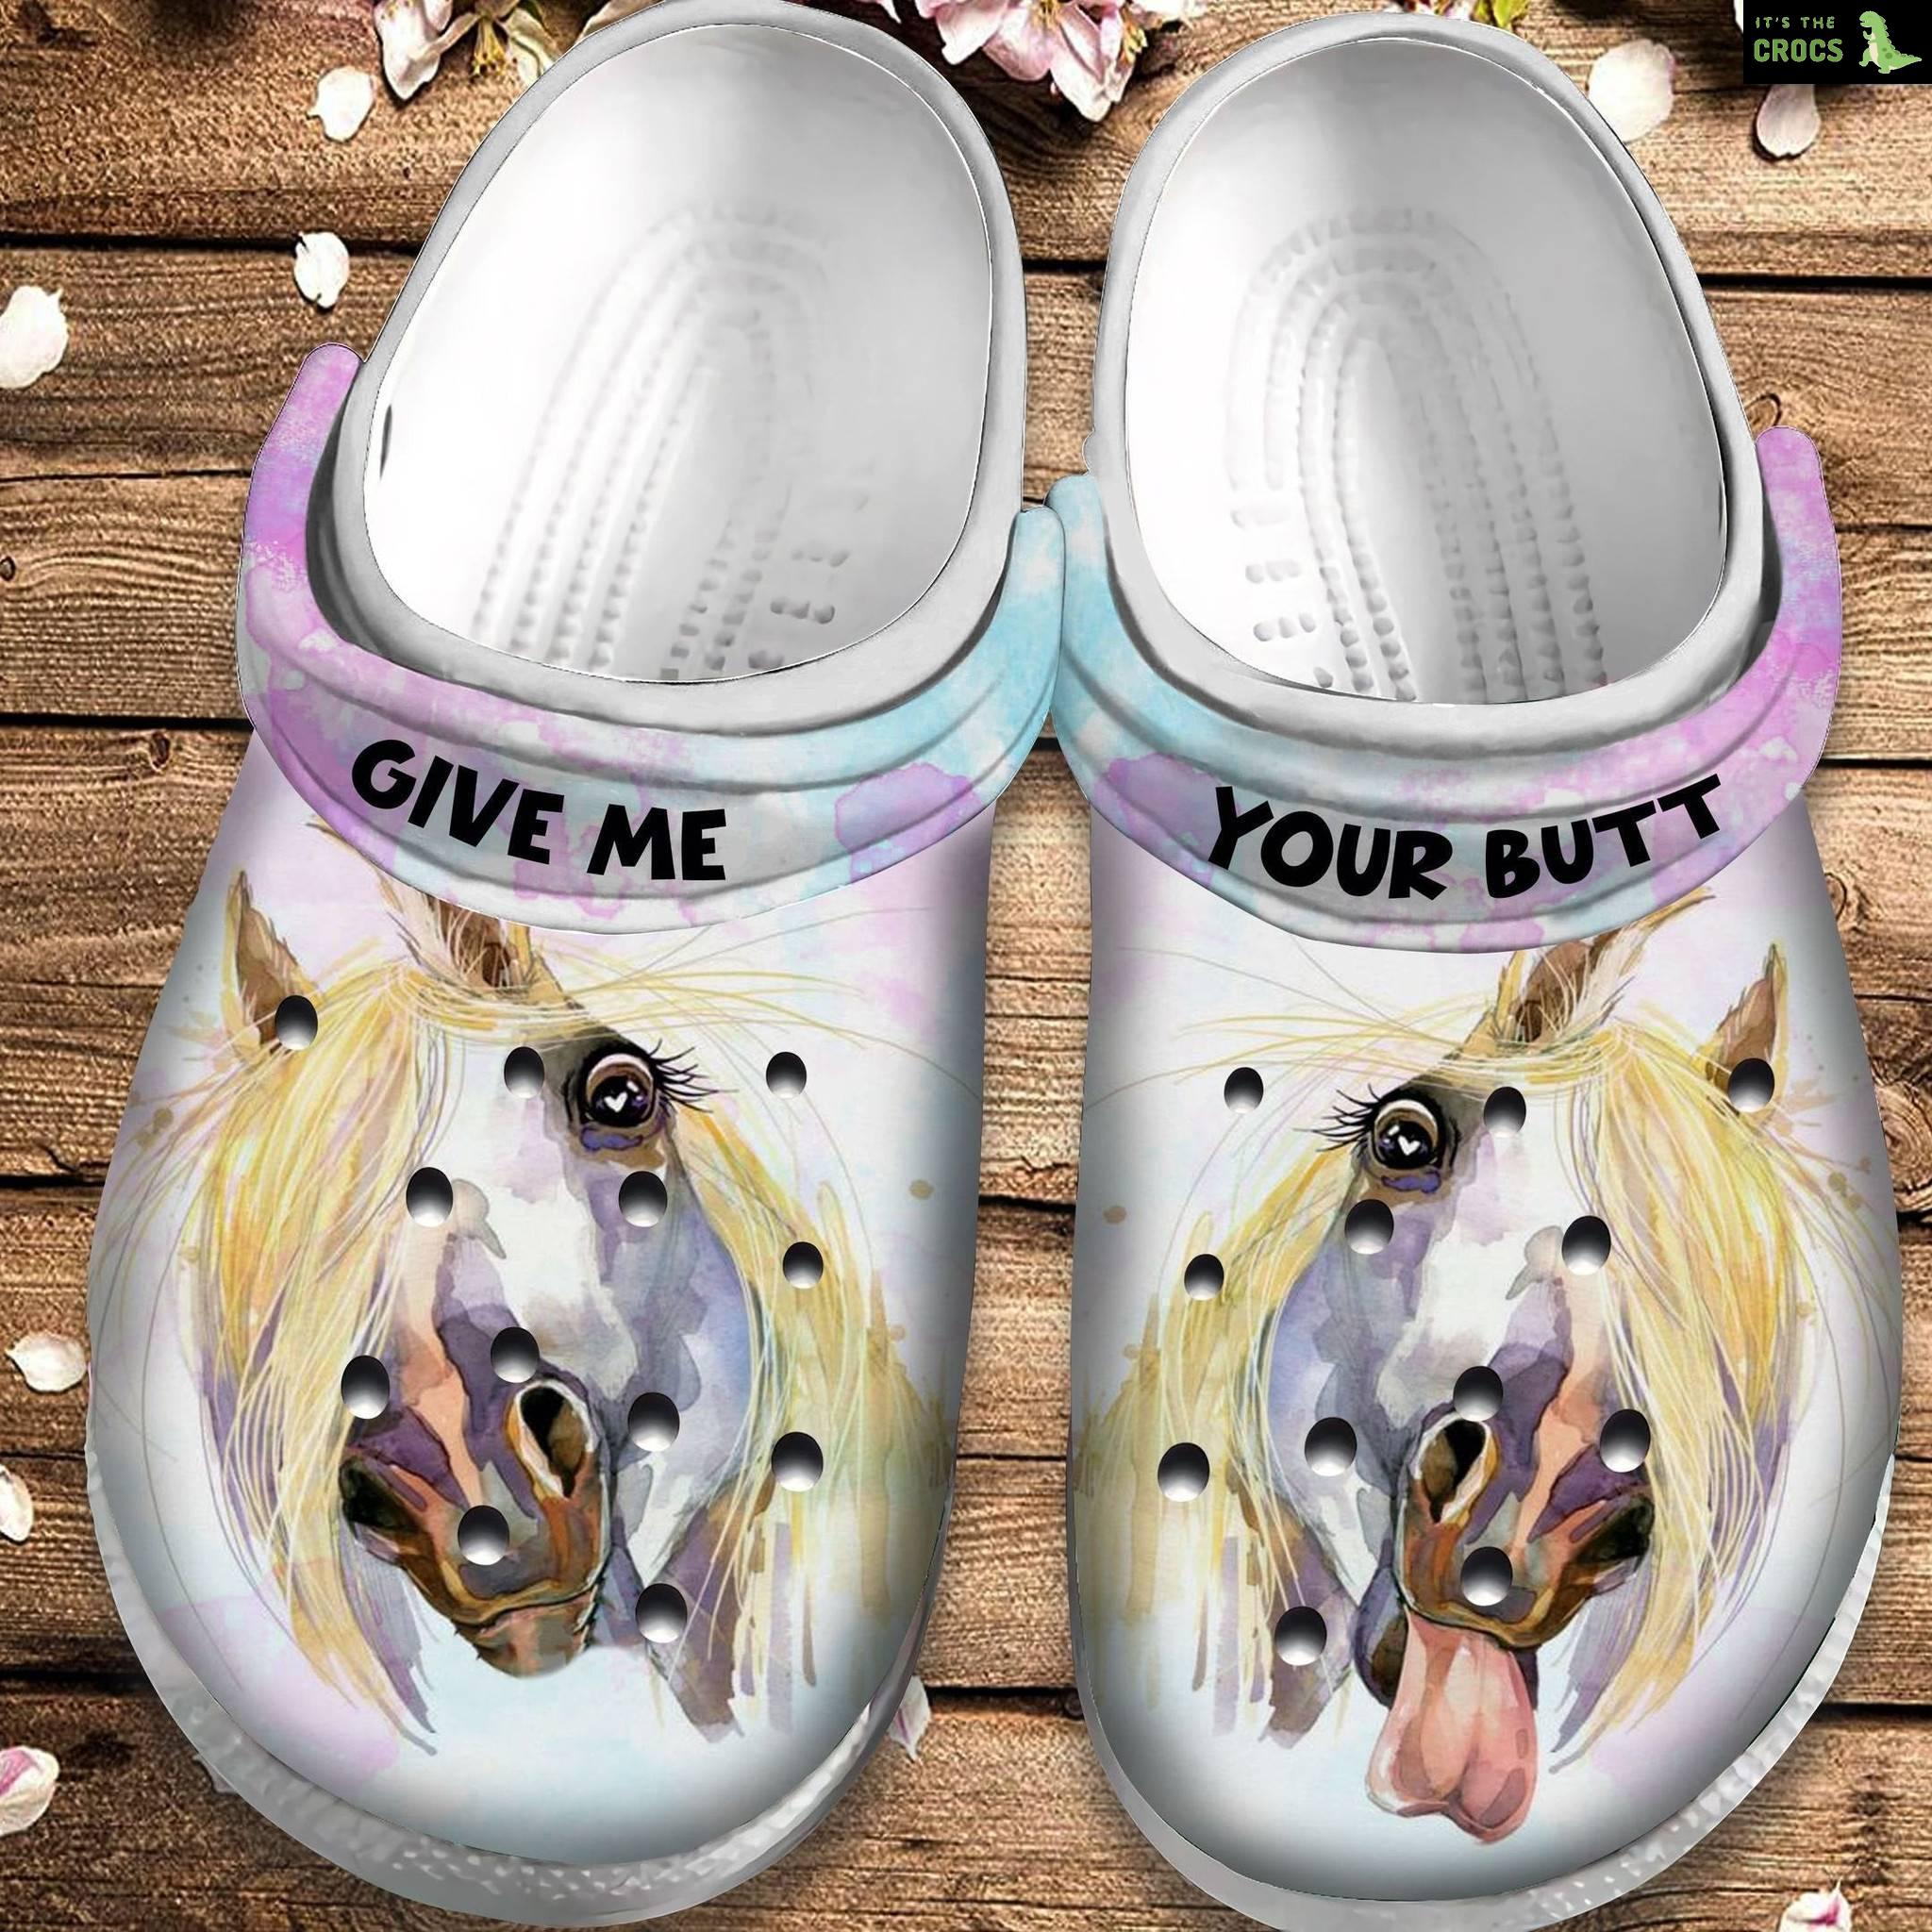 Crazy Horse Clog Crocs Shoes – Give Me Birthday Gift For Men Women Boy Girl